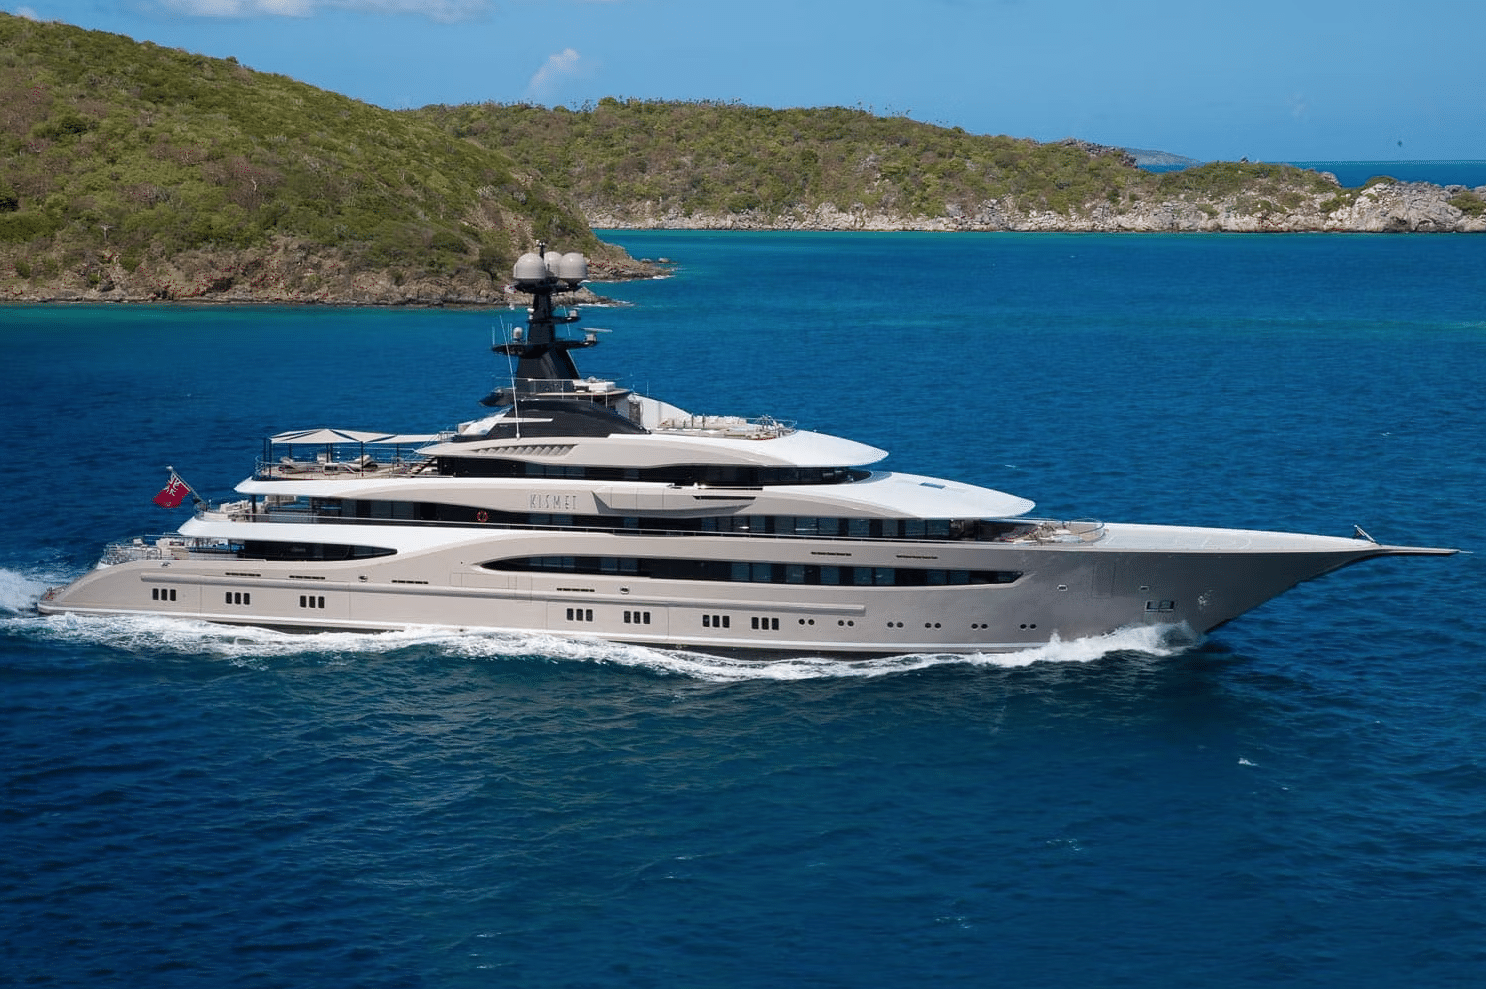 A full view of Shahid Khan's superyacht, Kismet, on the open water.